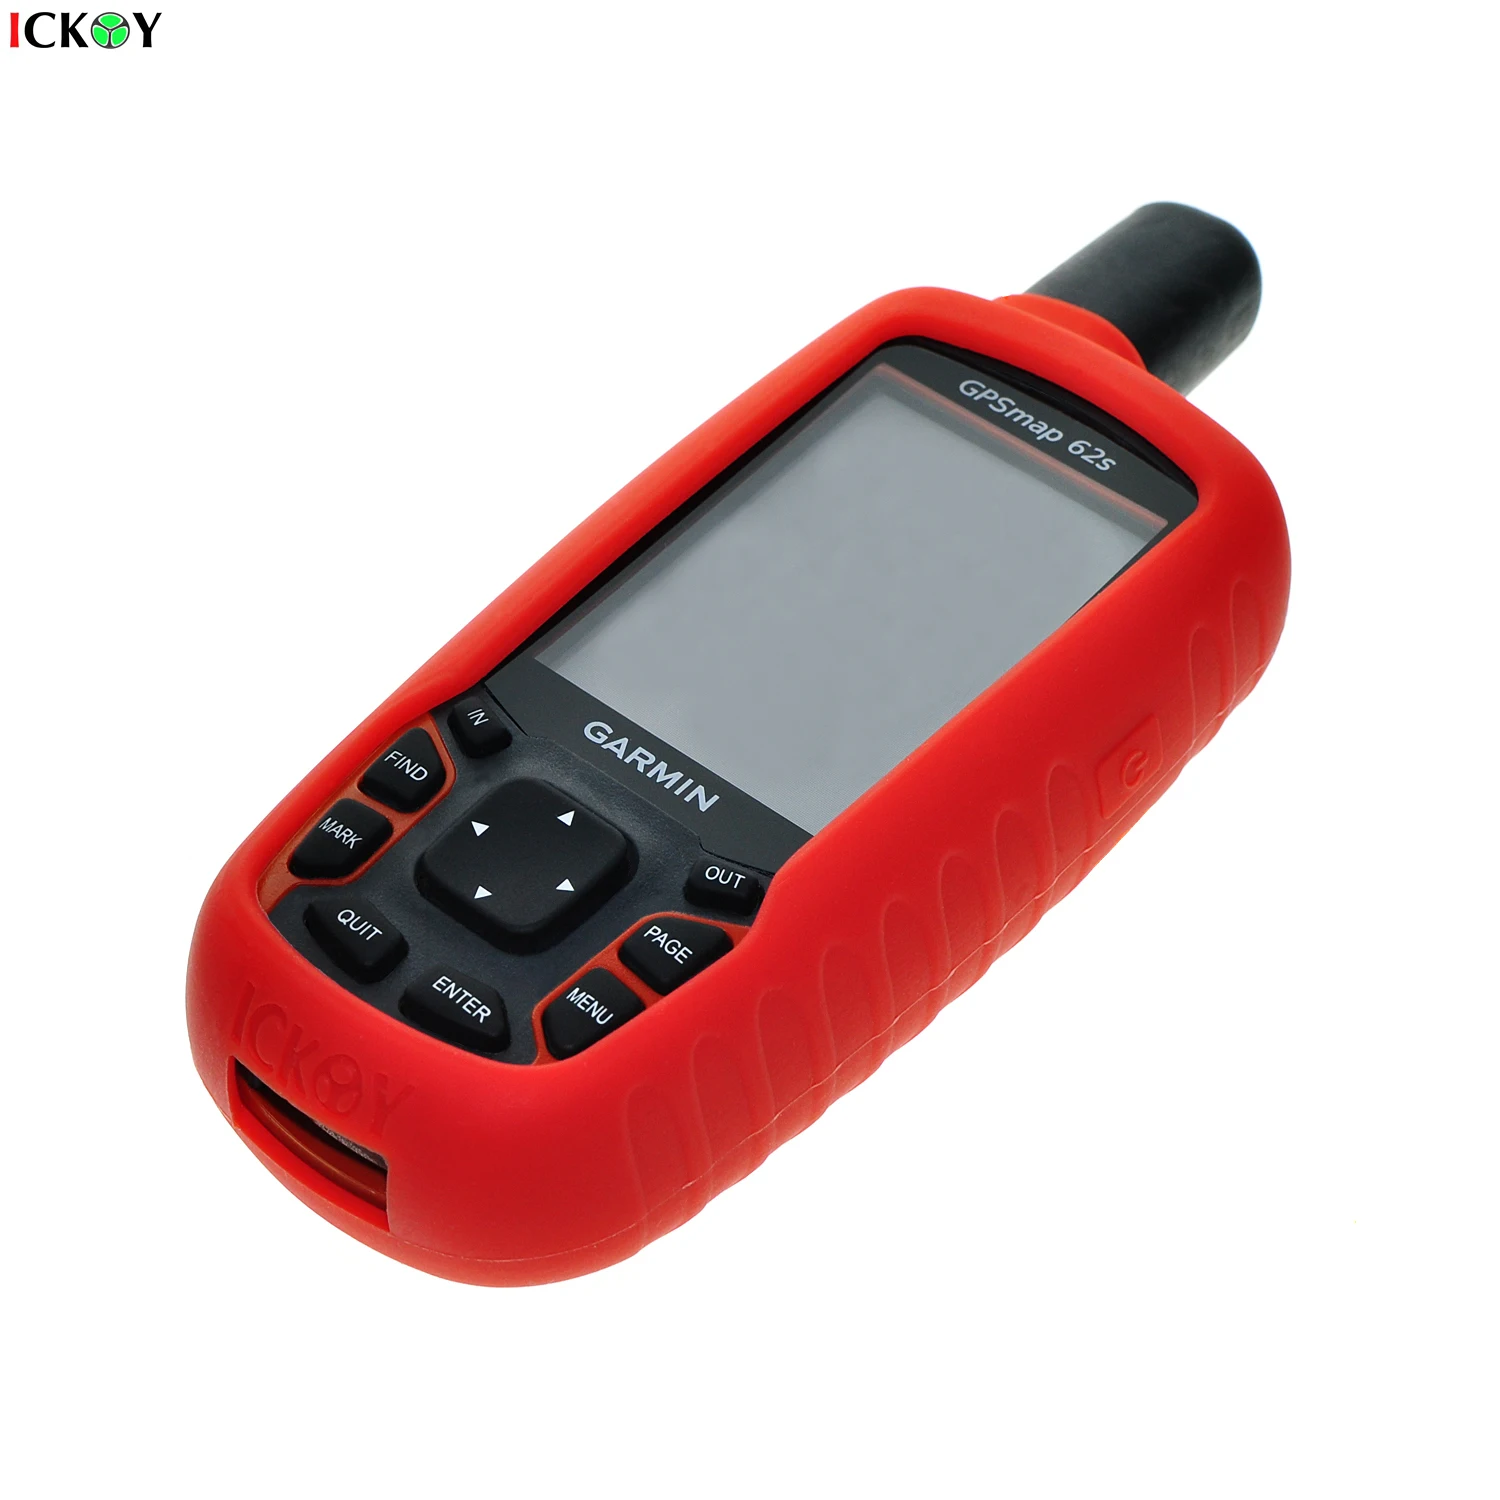 GPS Handset Navigation System Soft Silicone Skin Protective Cover 64s kwmobile Case for Garmin GPSMAP 64 Red 64st 